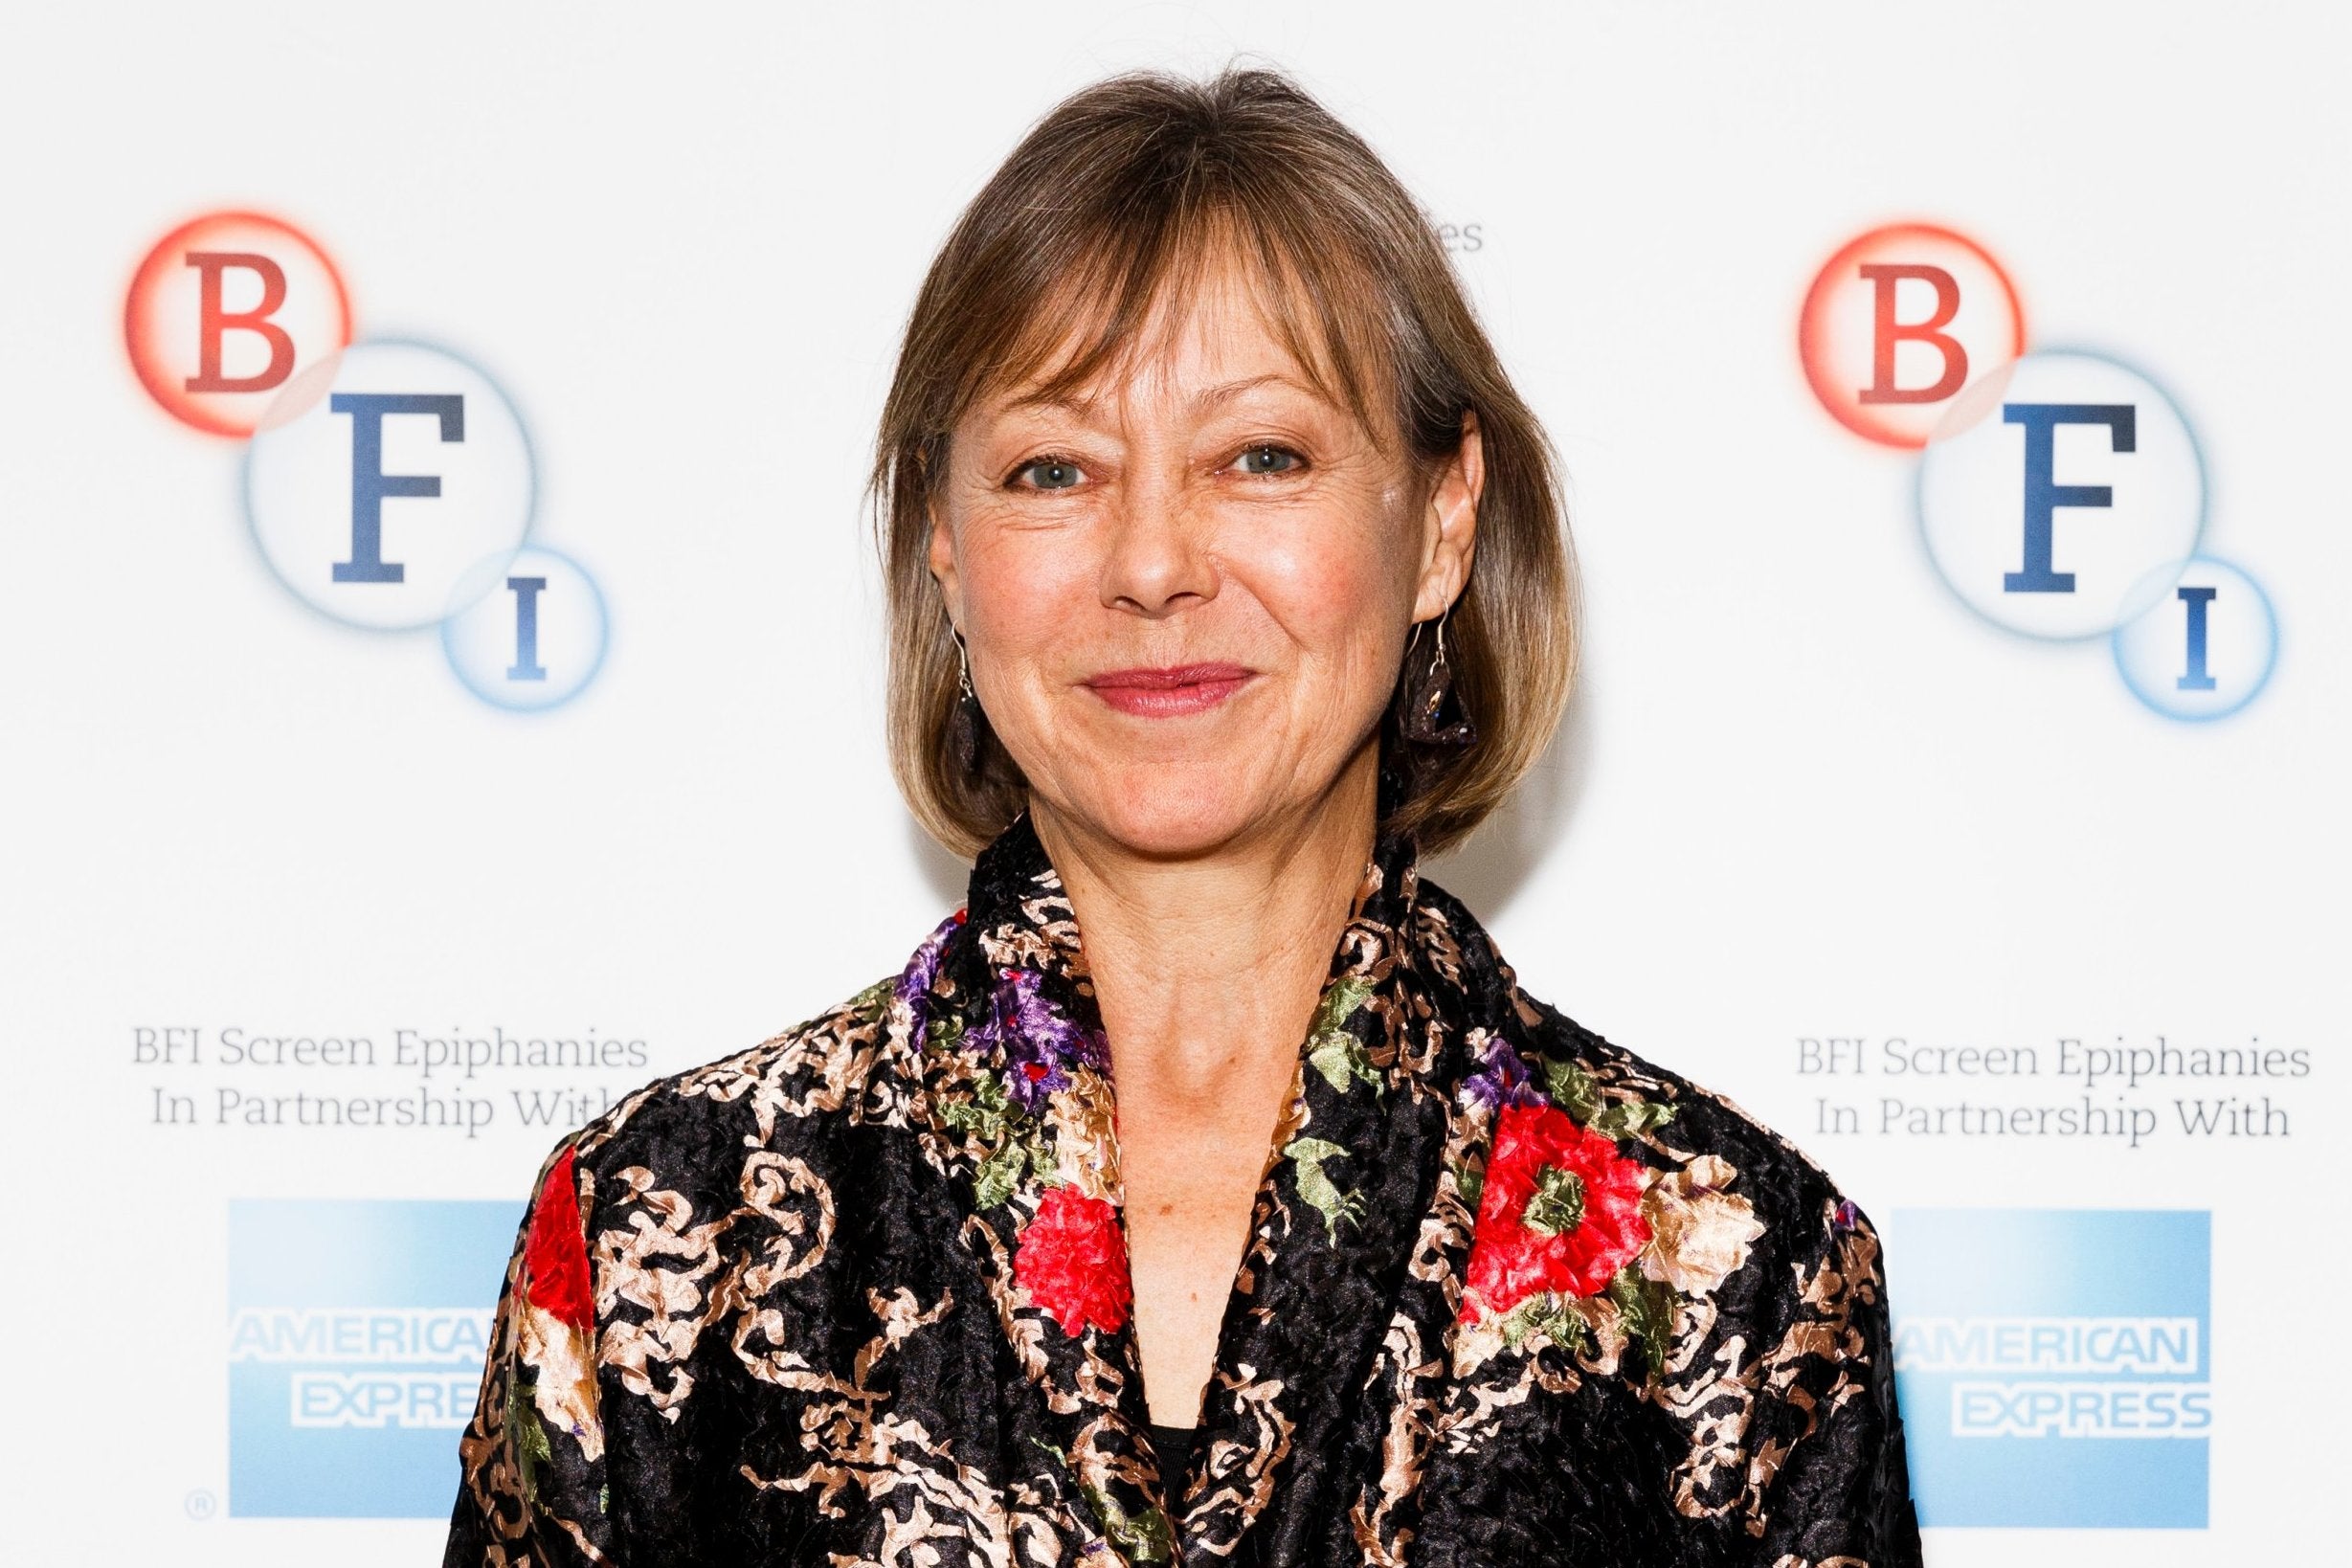 Jenny Agutter said that in the States, you'd only go to a private meeting with someone as a woman if you 'found them very attractive'